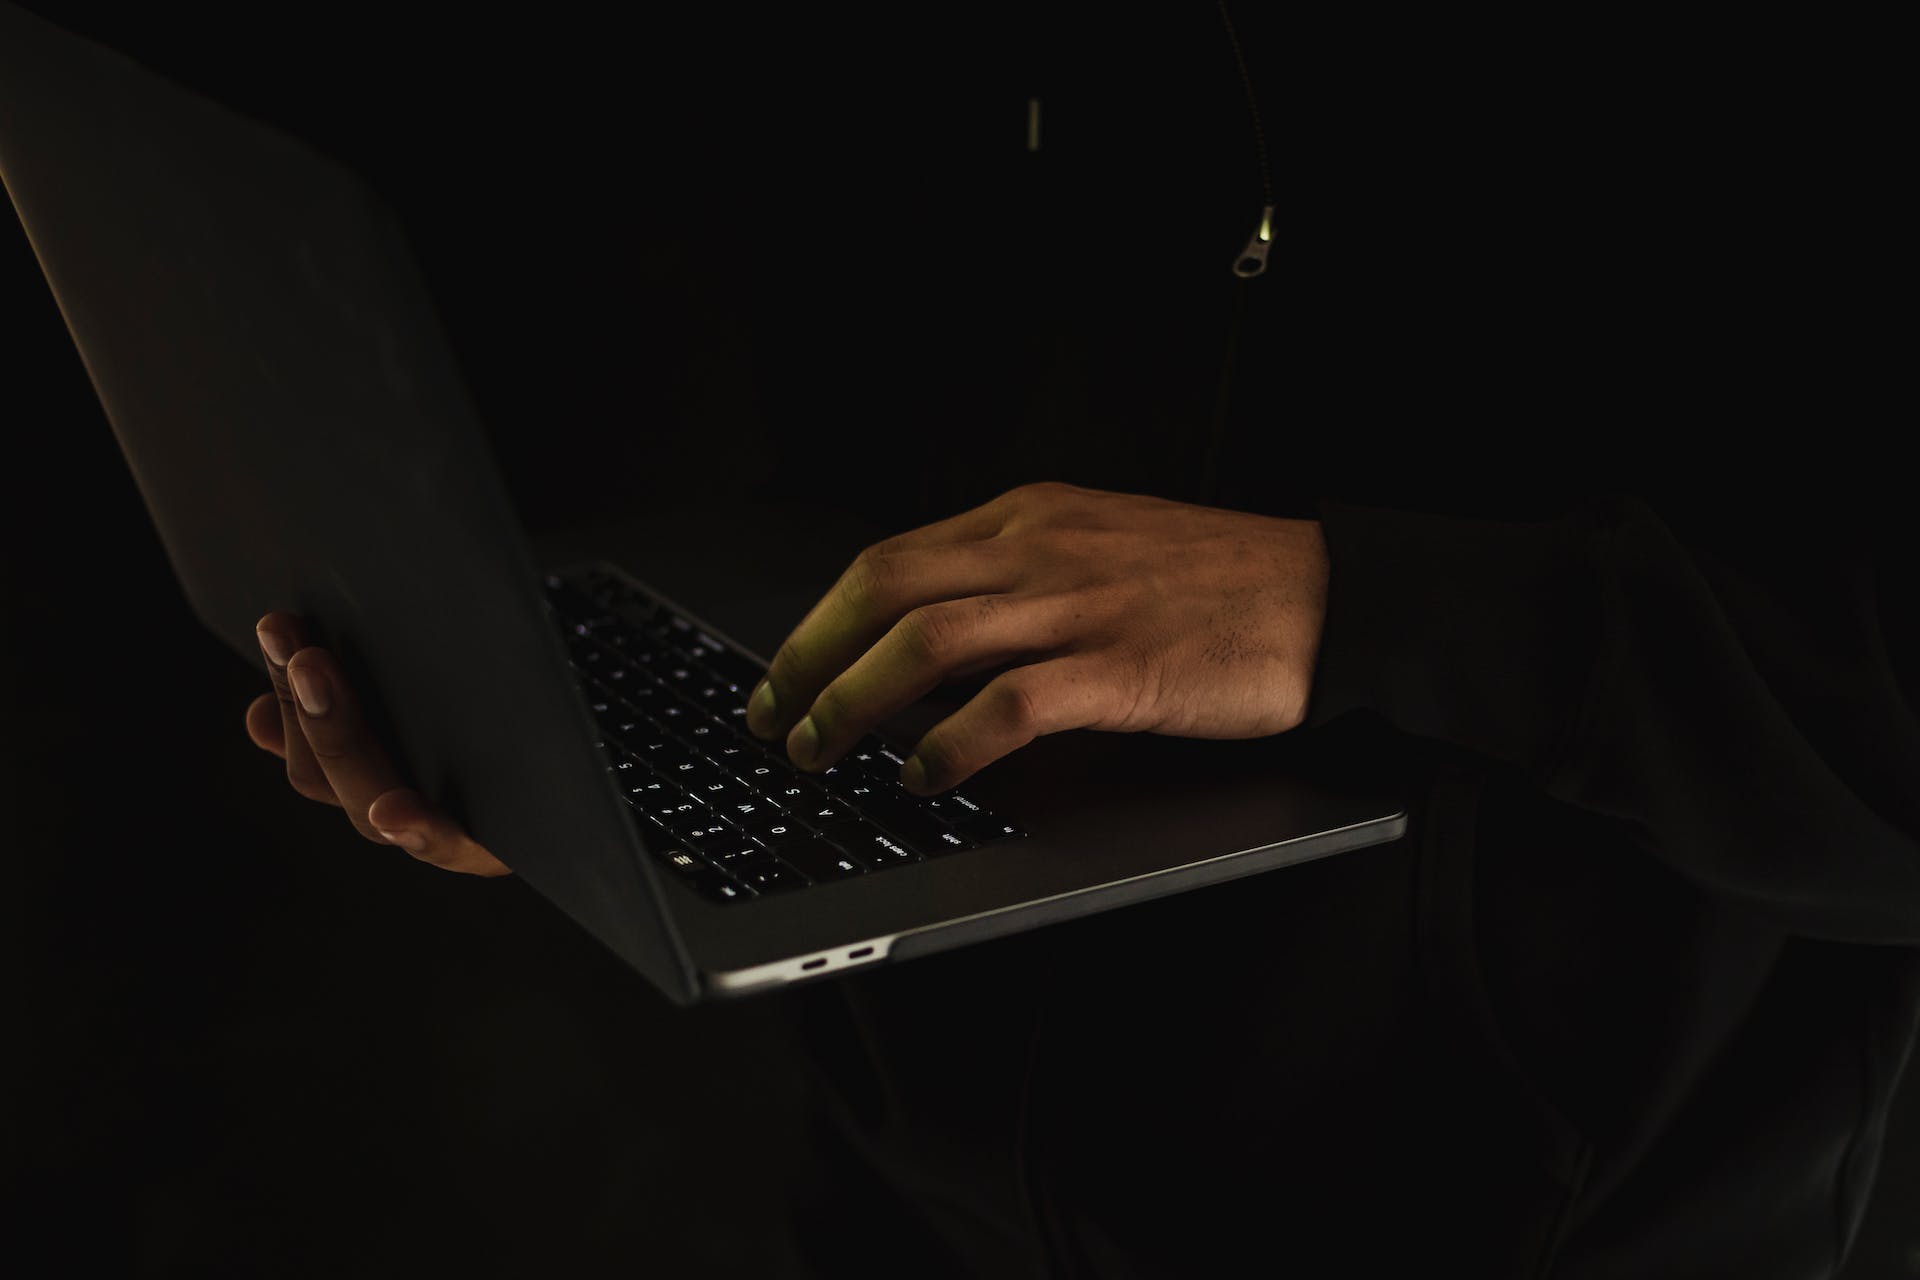 A person using a laptop in the dark | Source: Pexels